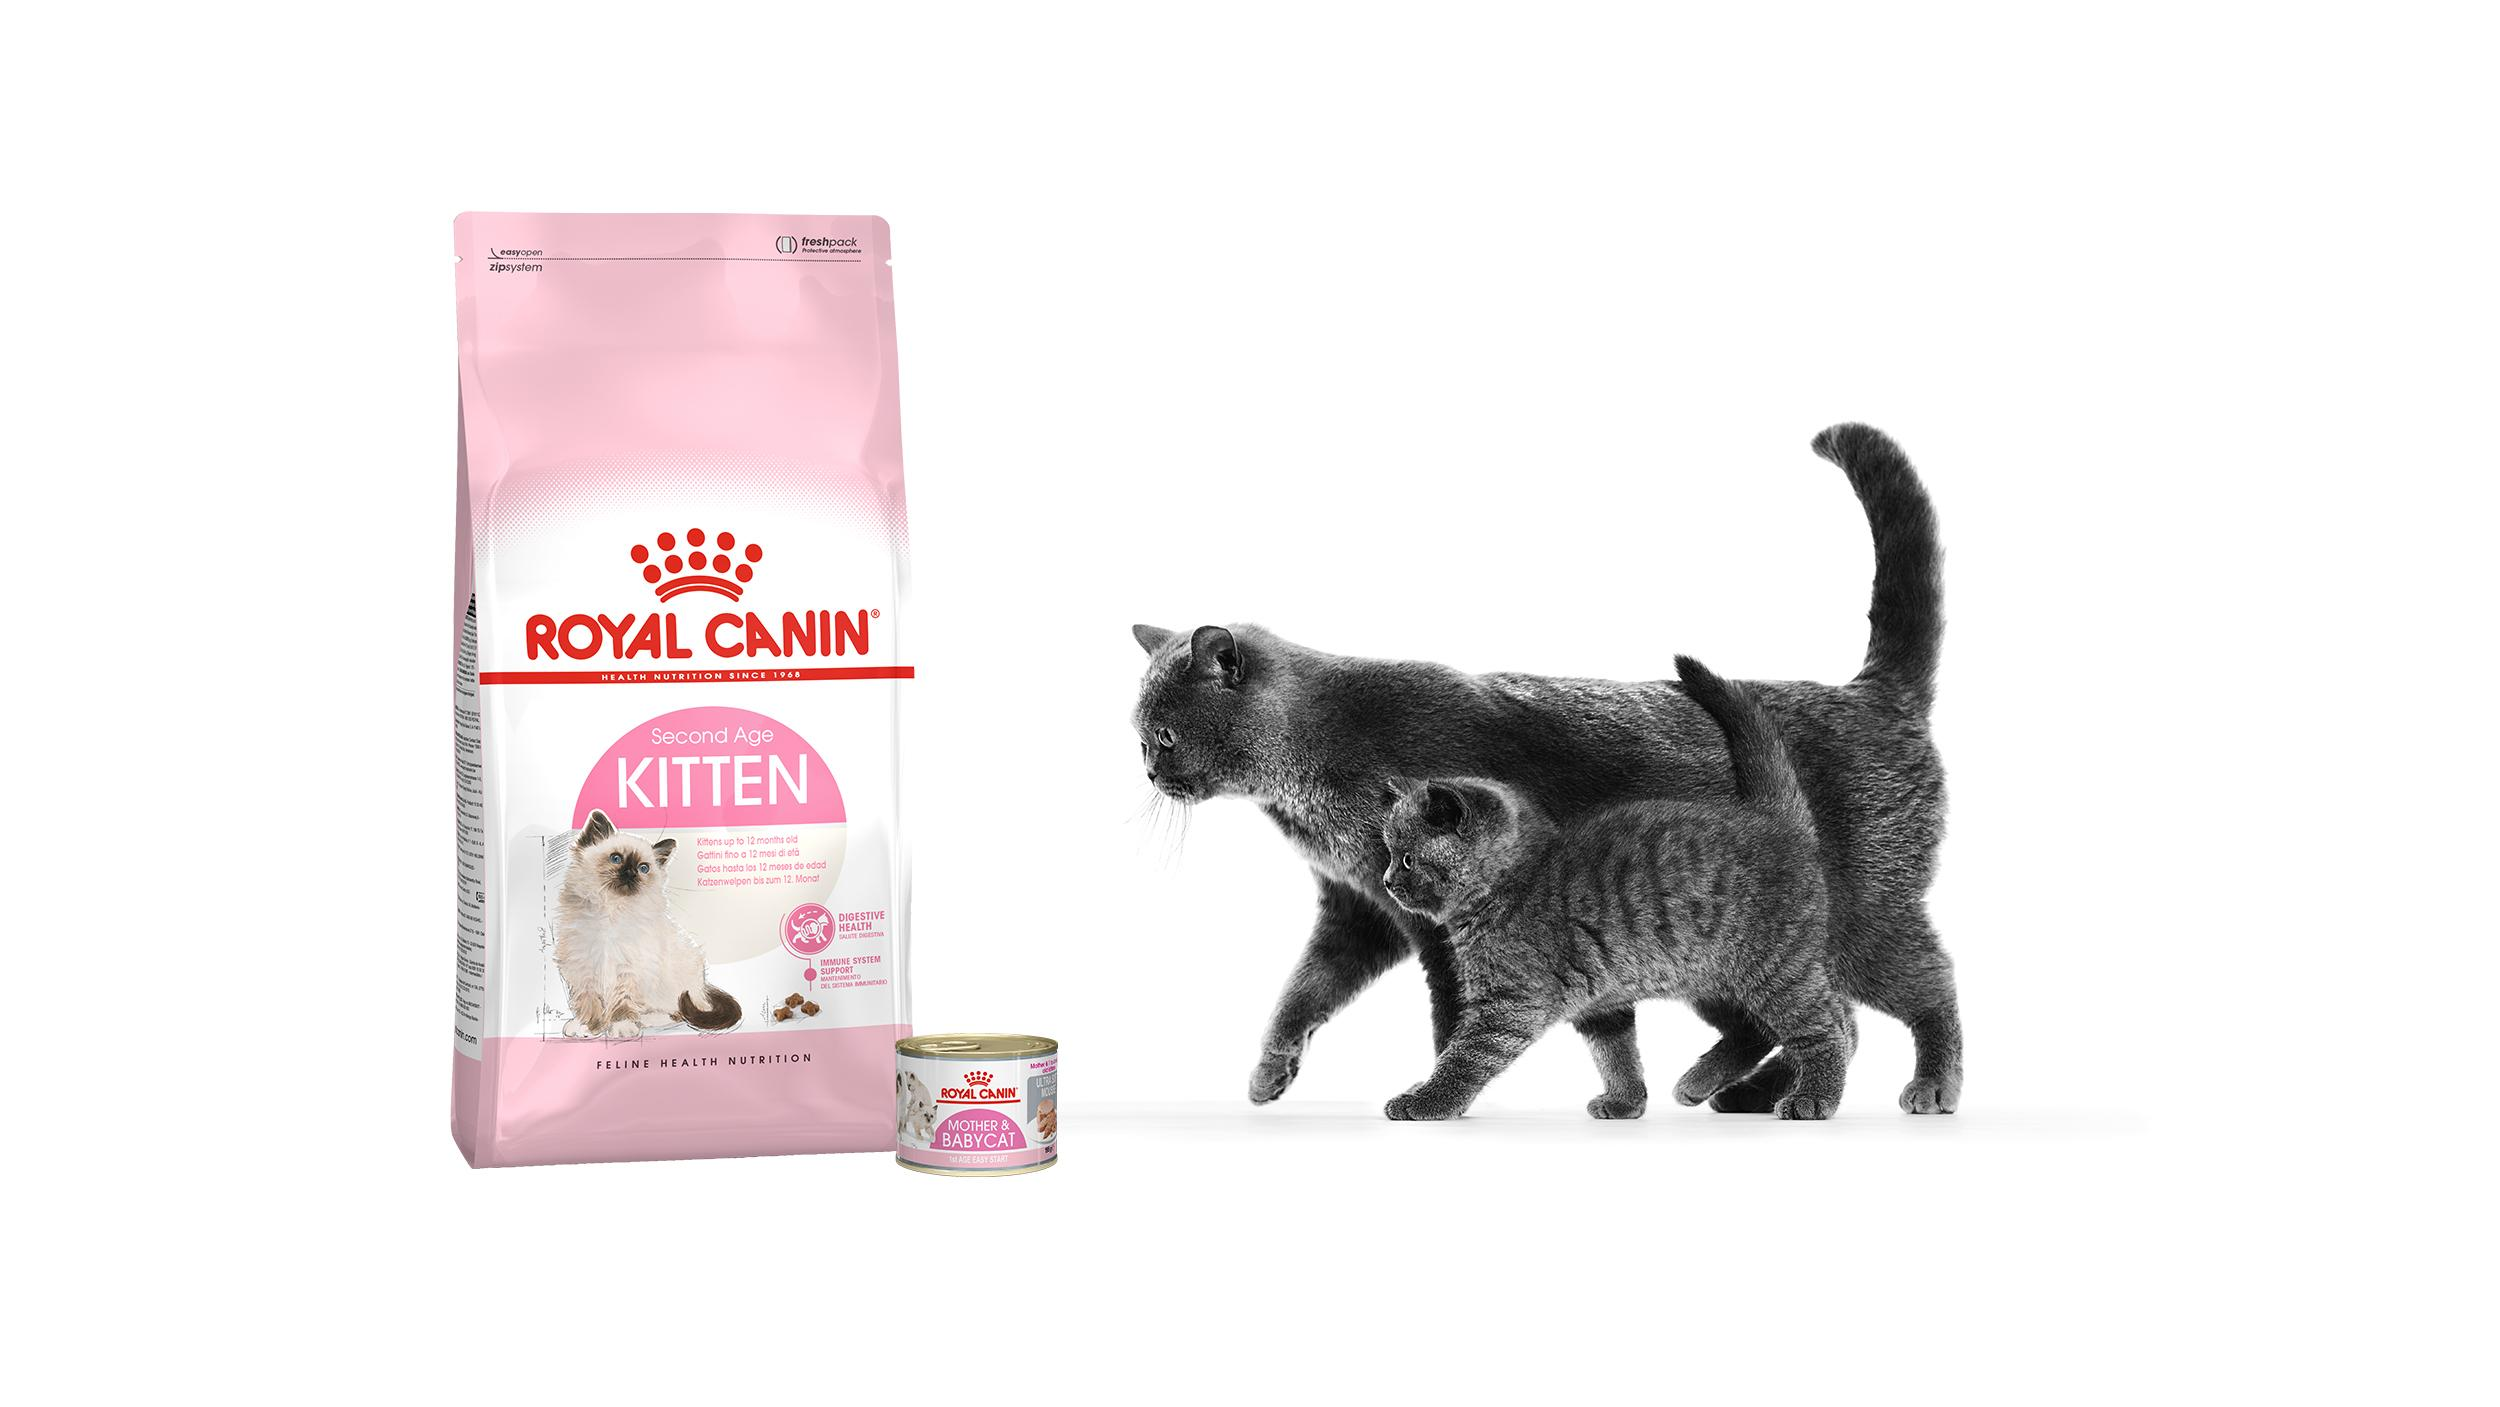 tailored-nutrition-for-your-kitten-neonatal